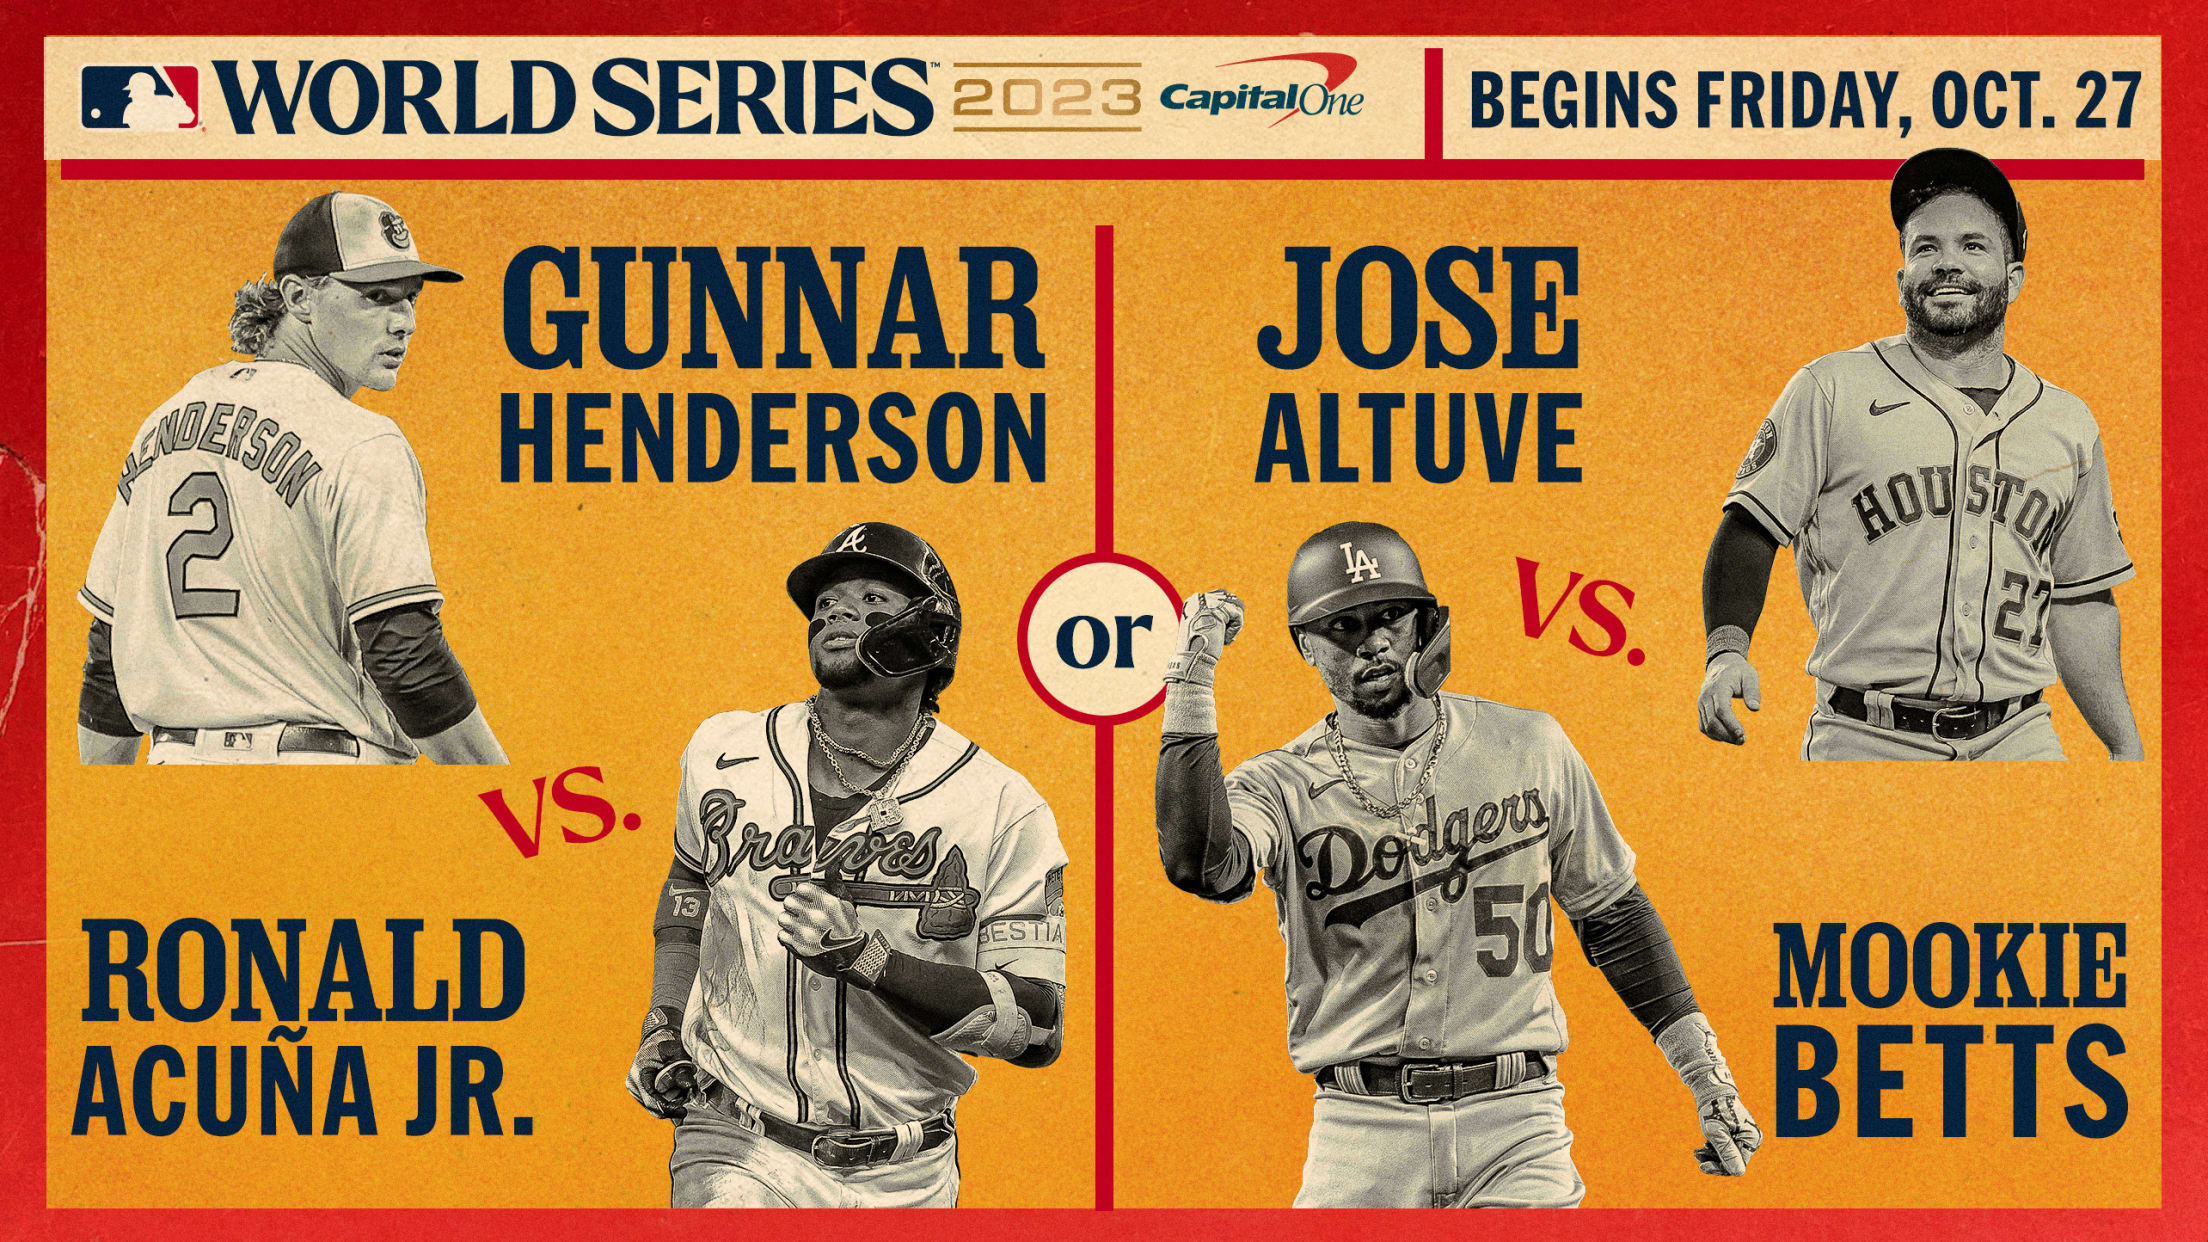 A graphic made to look like a sports promotional poster featuring Gunnar Henderson vs. Ronald Acuña Jr. and Jose Altuve vs. Mookie Betts